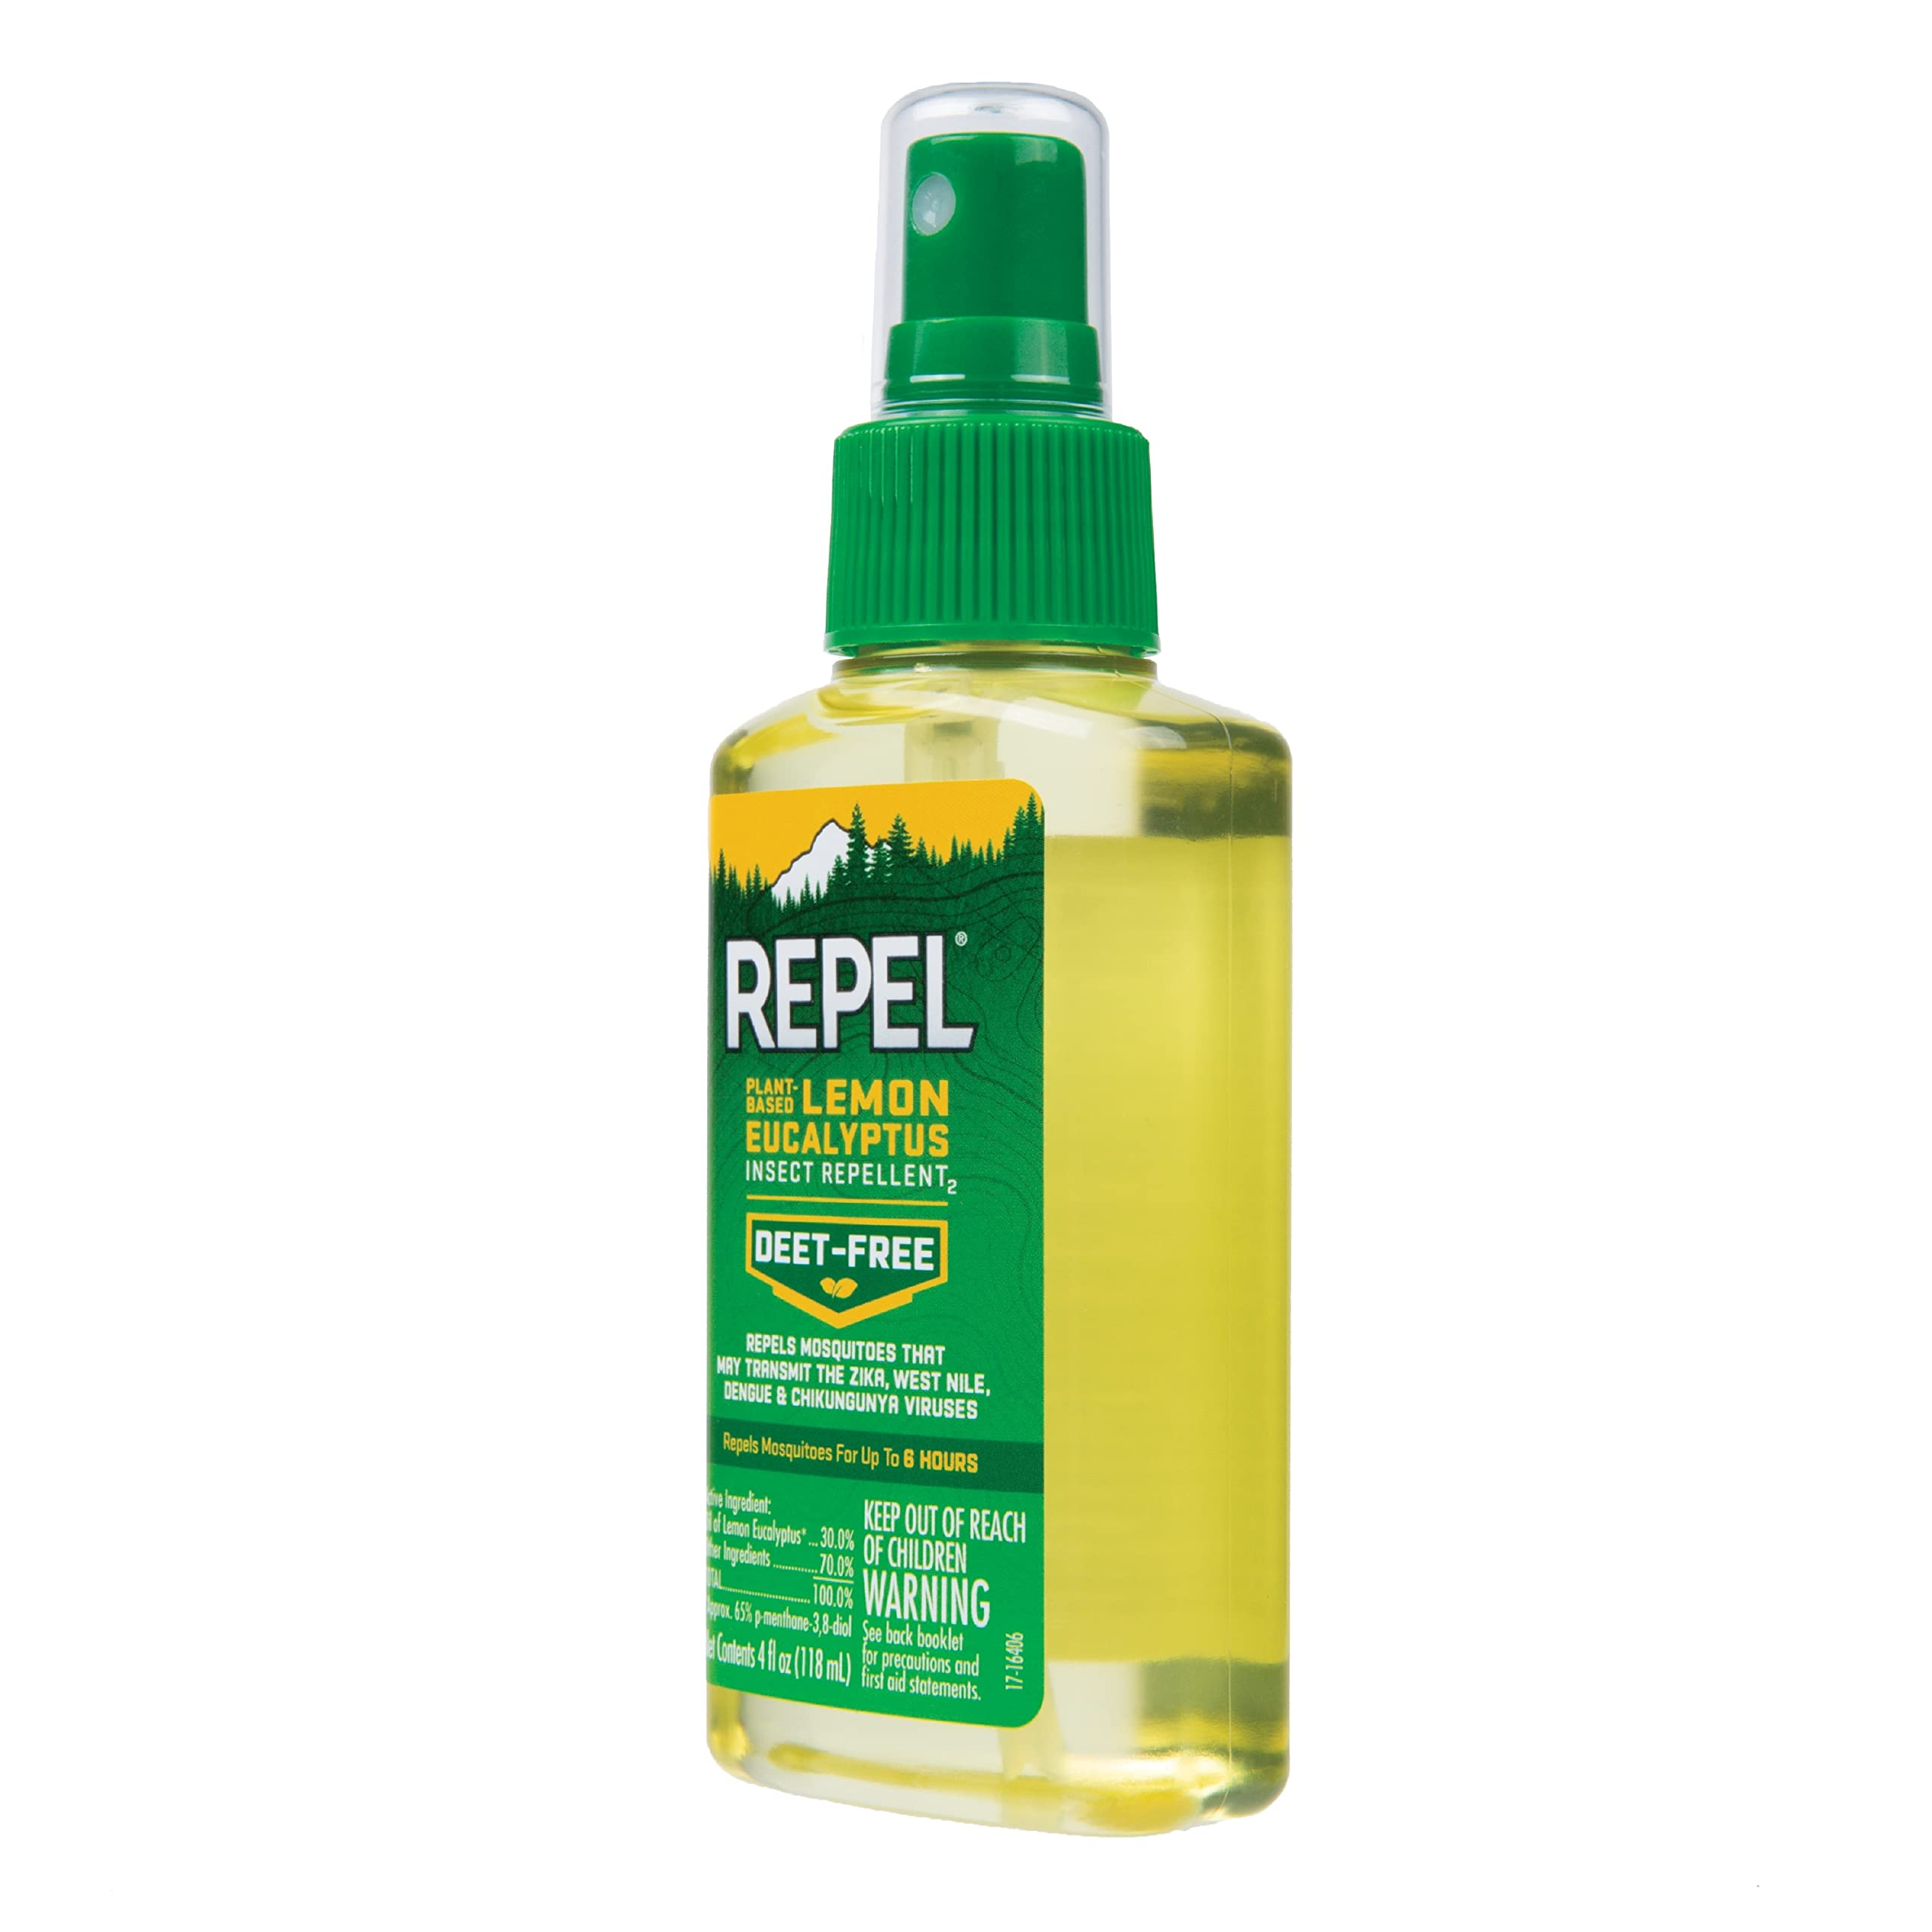 Repel Plant-Based Lemon Eucalyptus Insect Repellent 4 Ounces, Repels Mosquitoes Up To 6 Hours